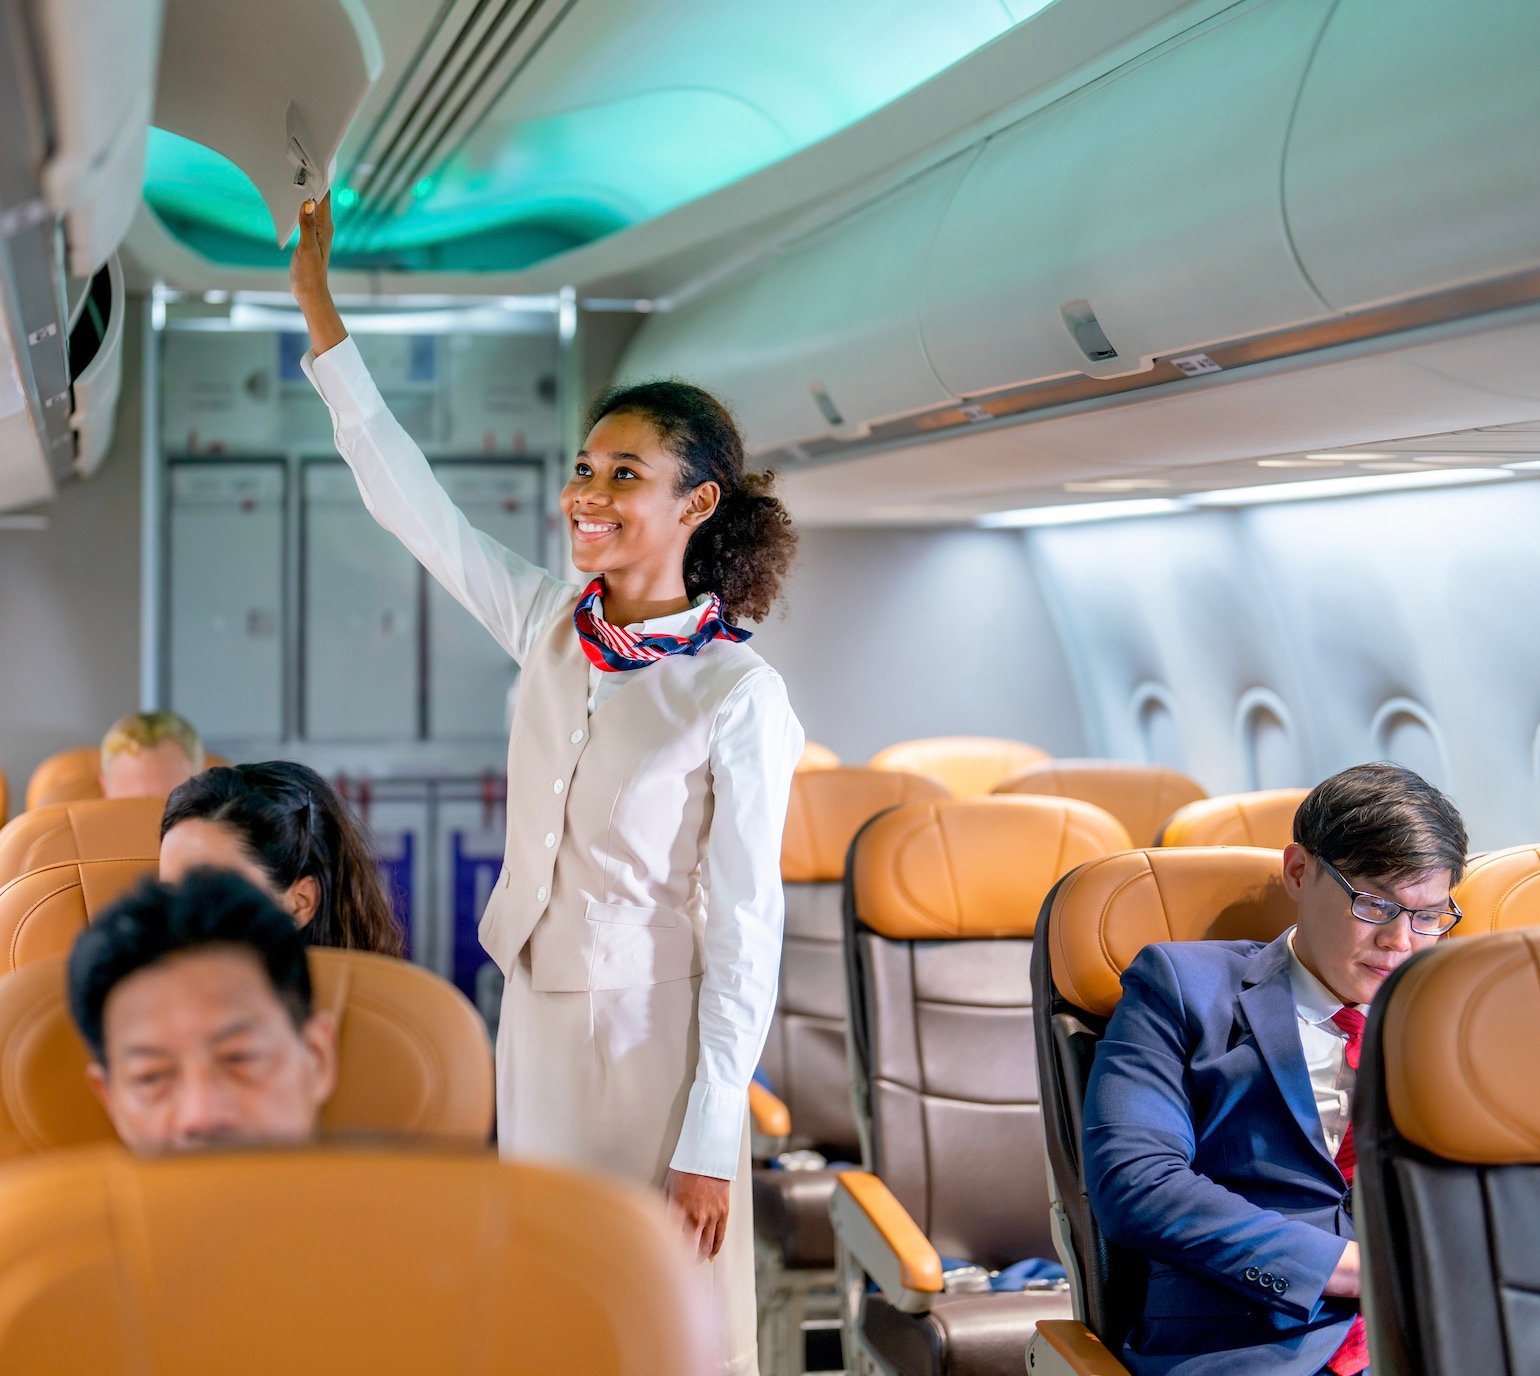 Become a Flight Attendant in SA in 5 STEPS